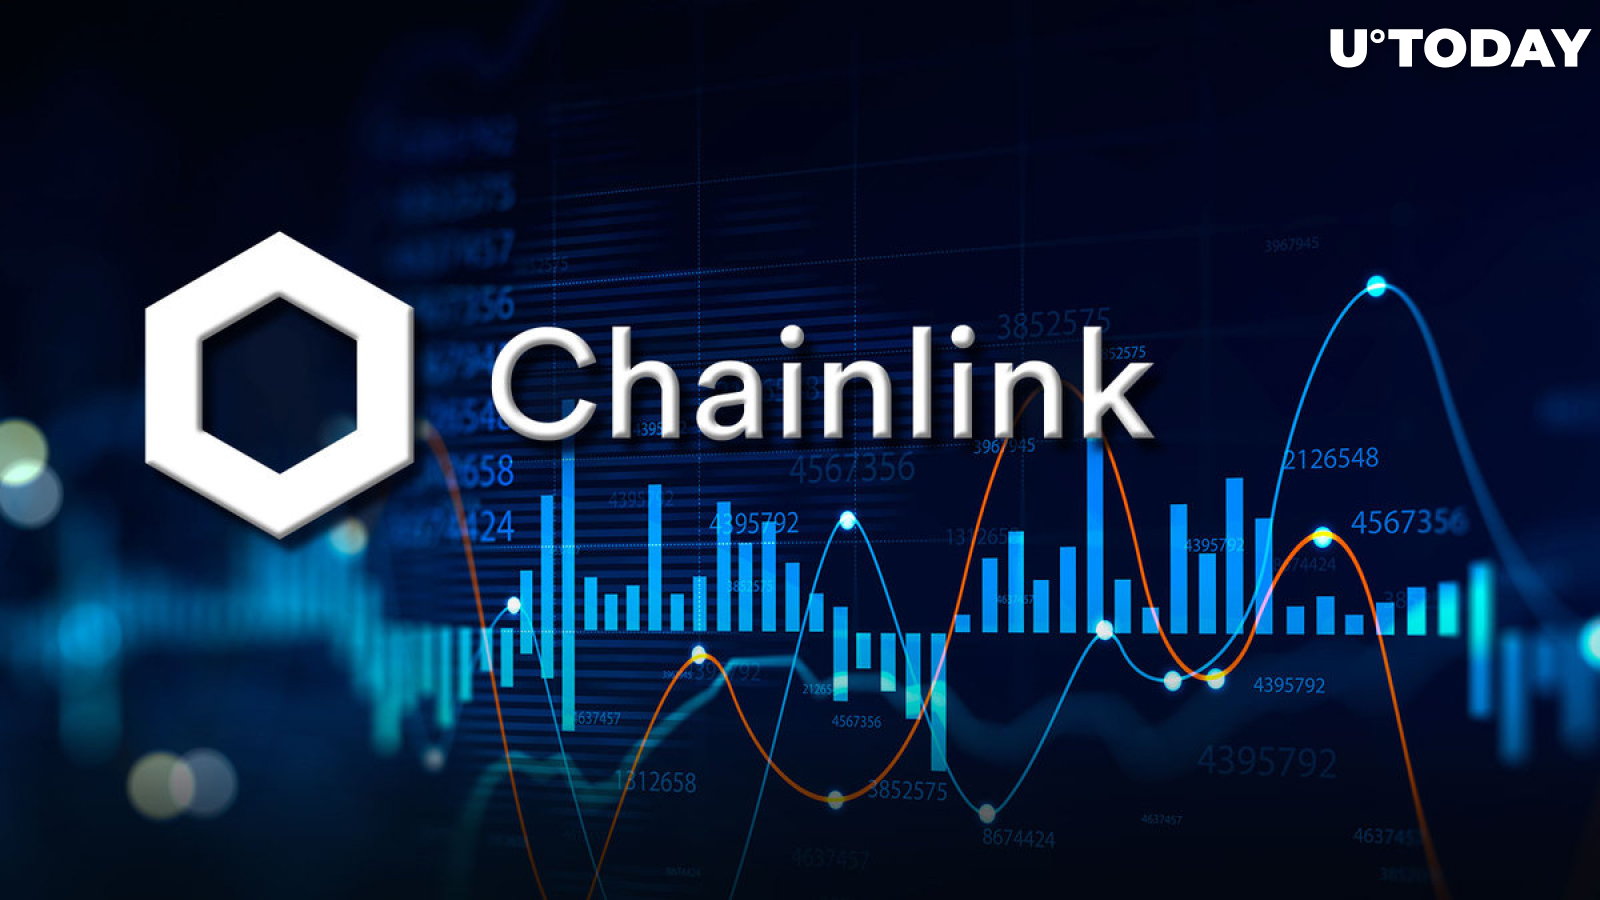 Chainlink (LINK) Breaks Negative Correlation with Crypto Market, Moves up Independently